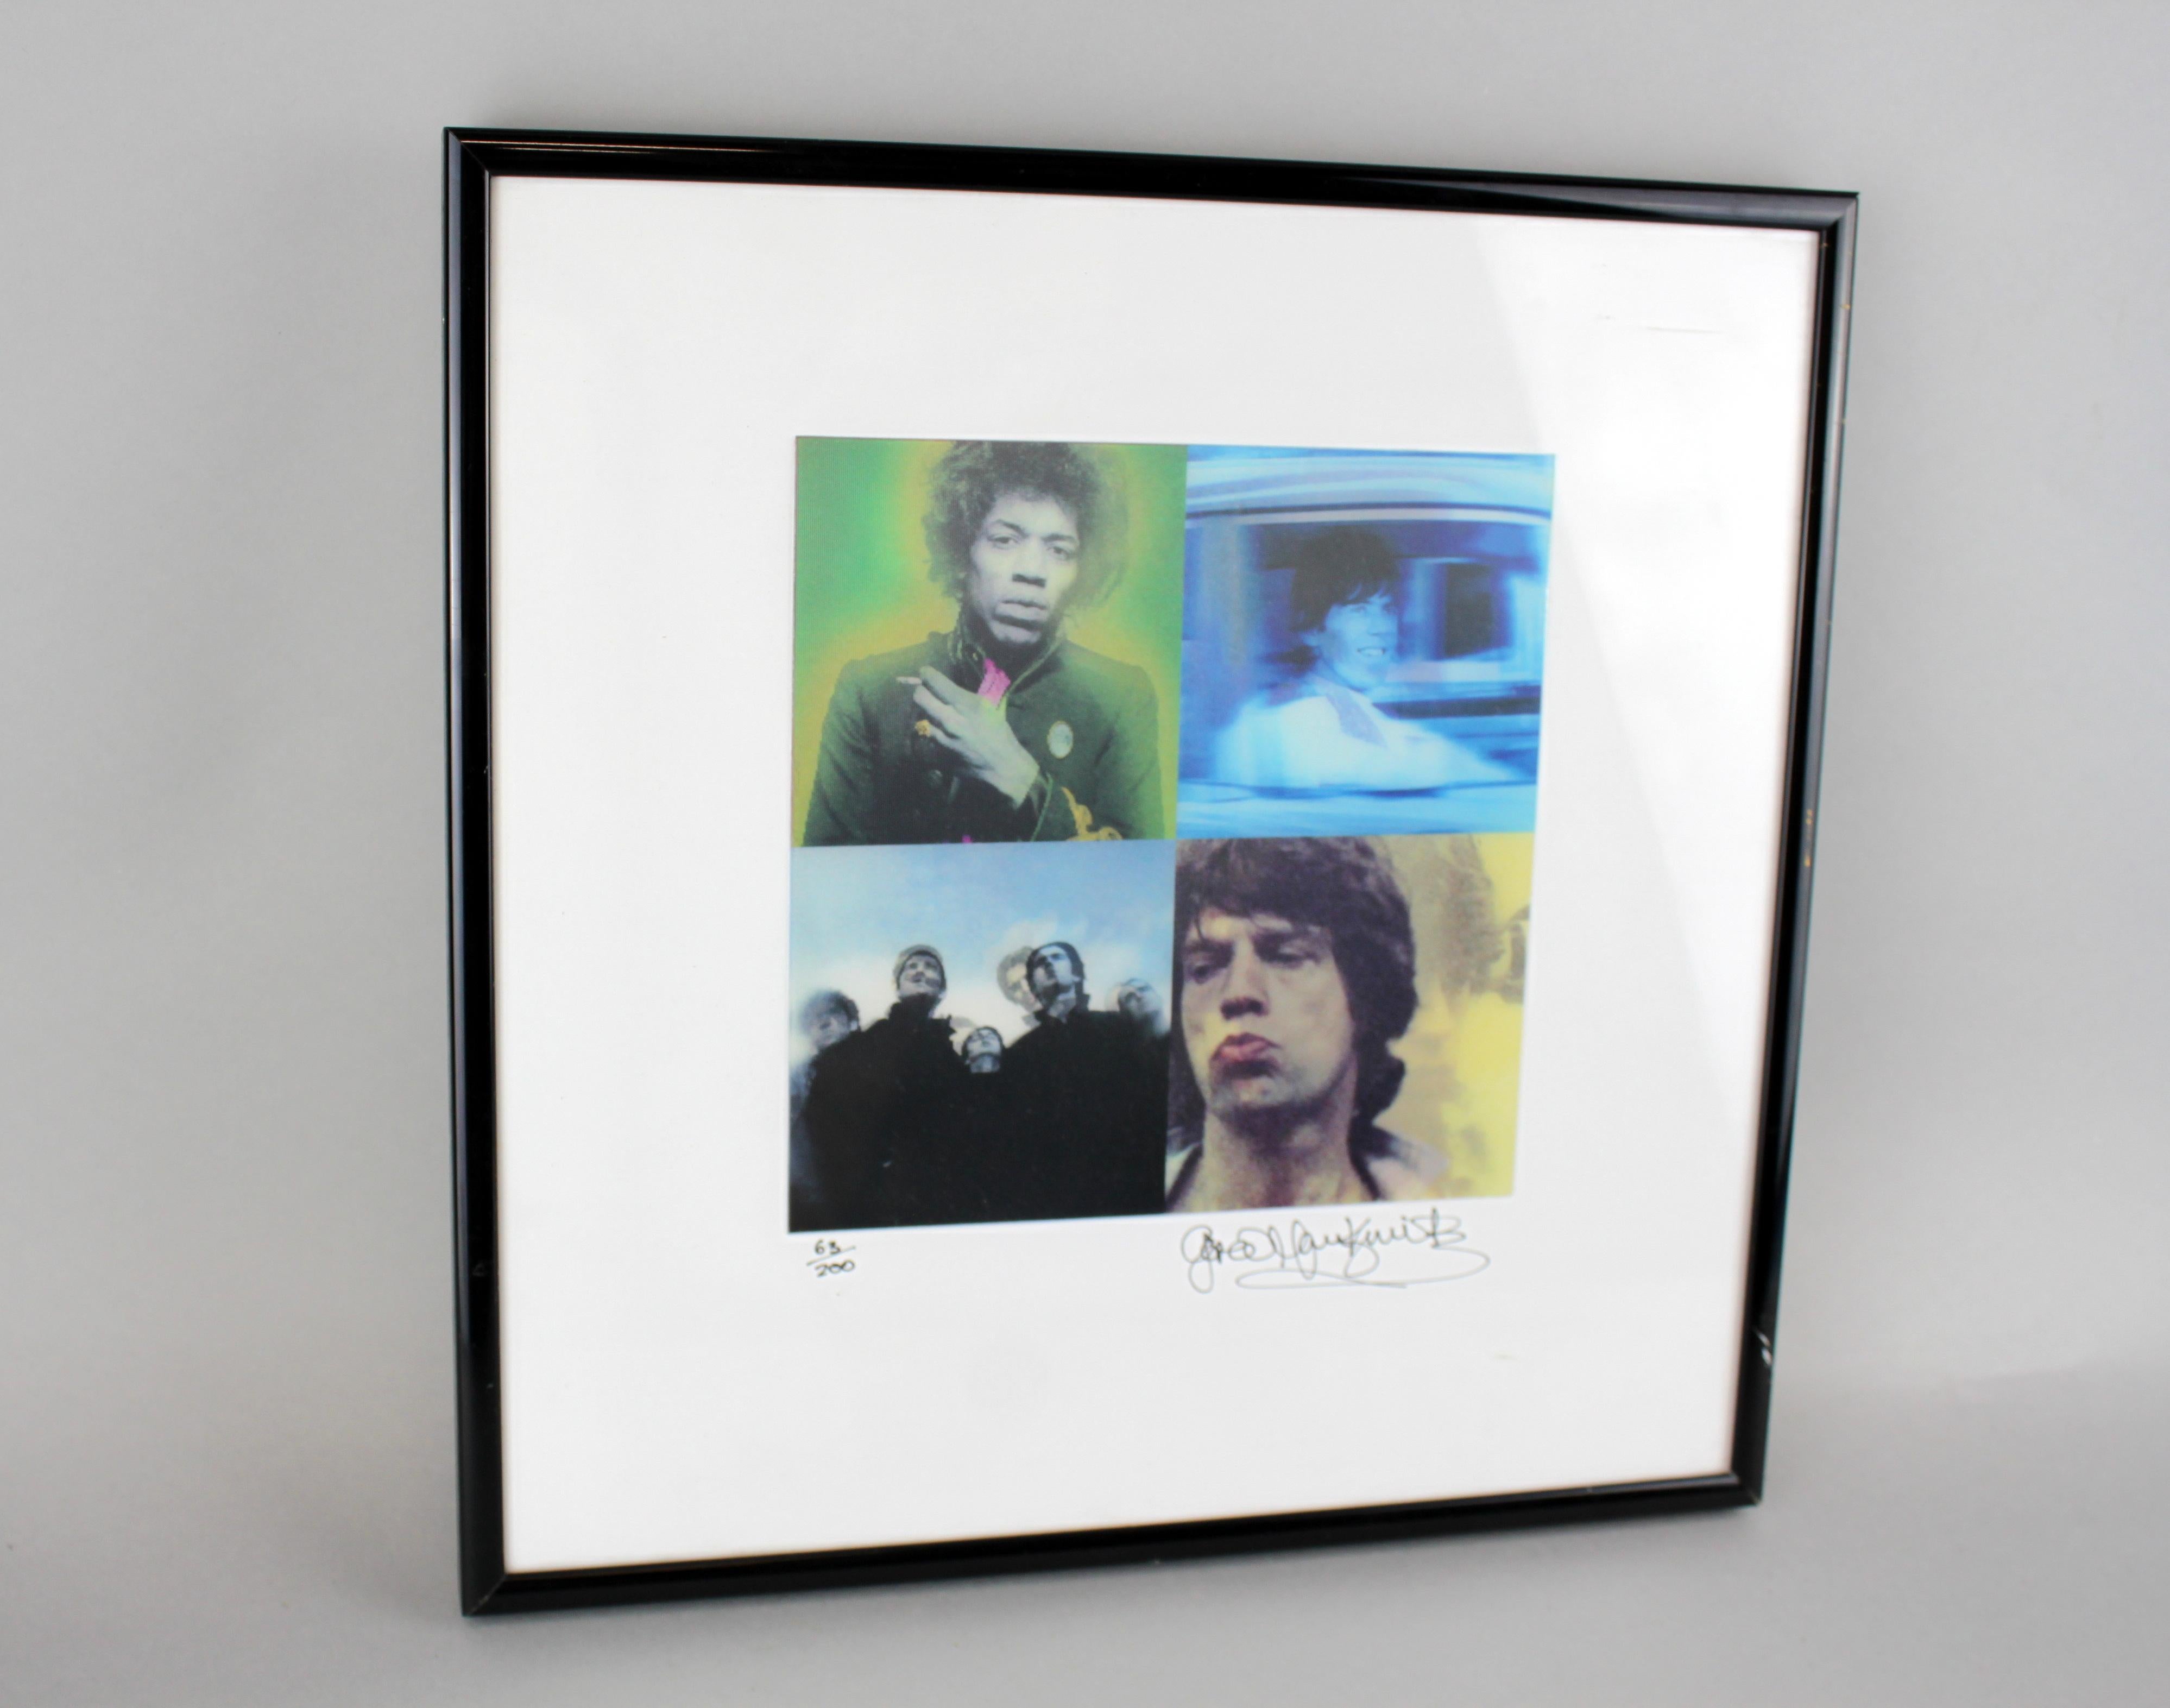 Gered Mankowitz - Exclusive Lenticular print.
Limited Edition 63 of 200
Jimi/ Keith/Mick/Oasis

Gered Mankowitz born 3 August 1946 is an English photographer who focused his career in the music industry. He has worked with a range of artists